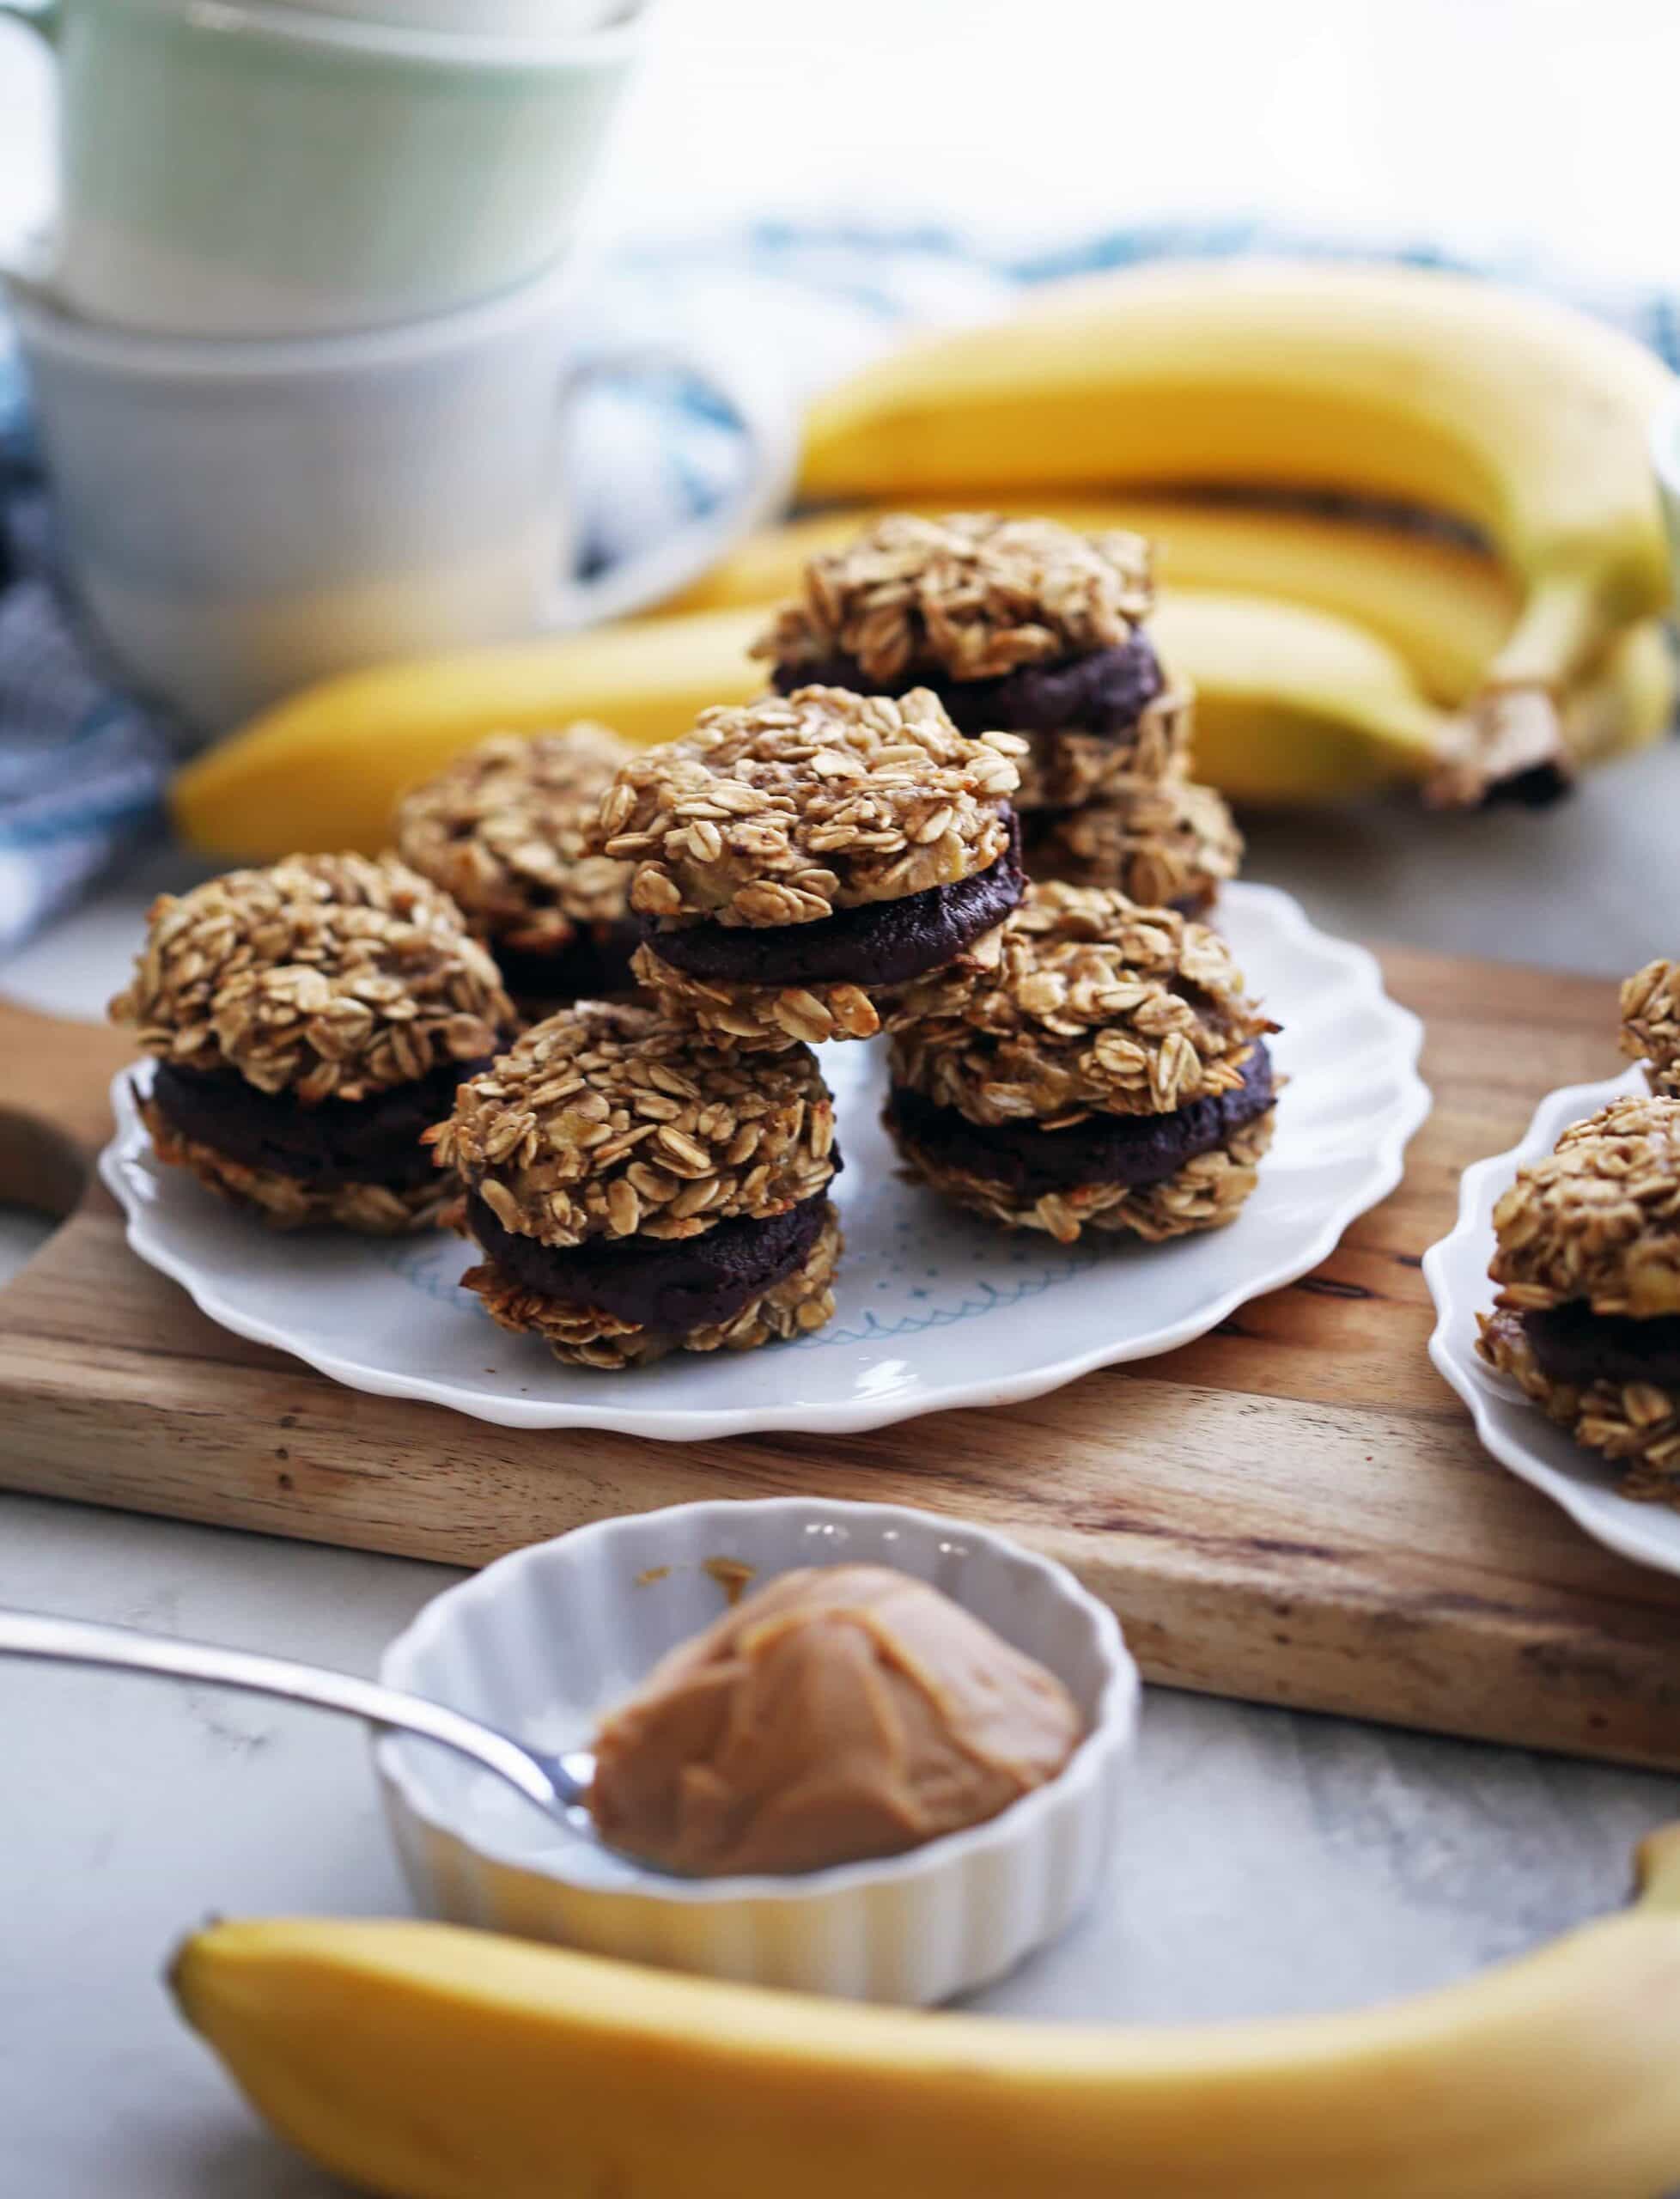 Banana Oatmeal Sandwich Cookies with Peanut Butter Cocoa Filling